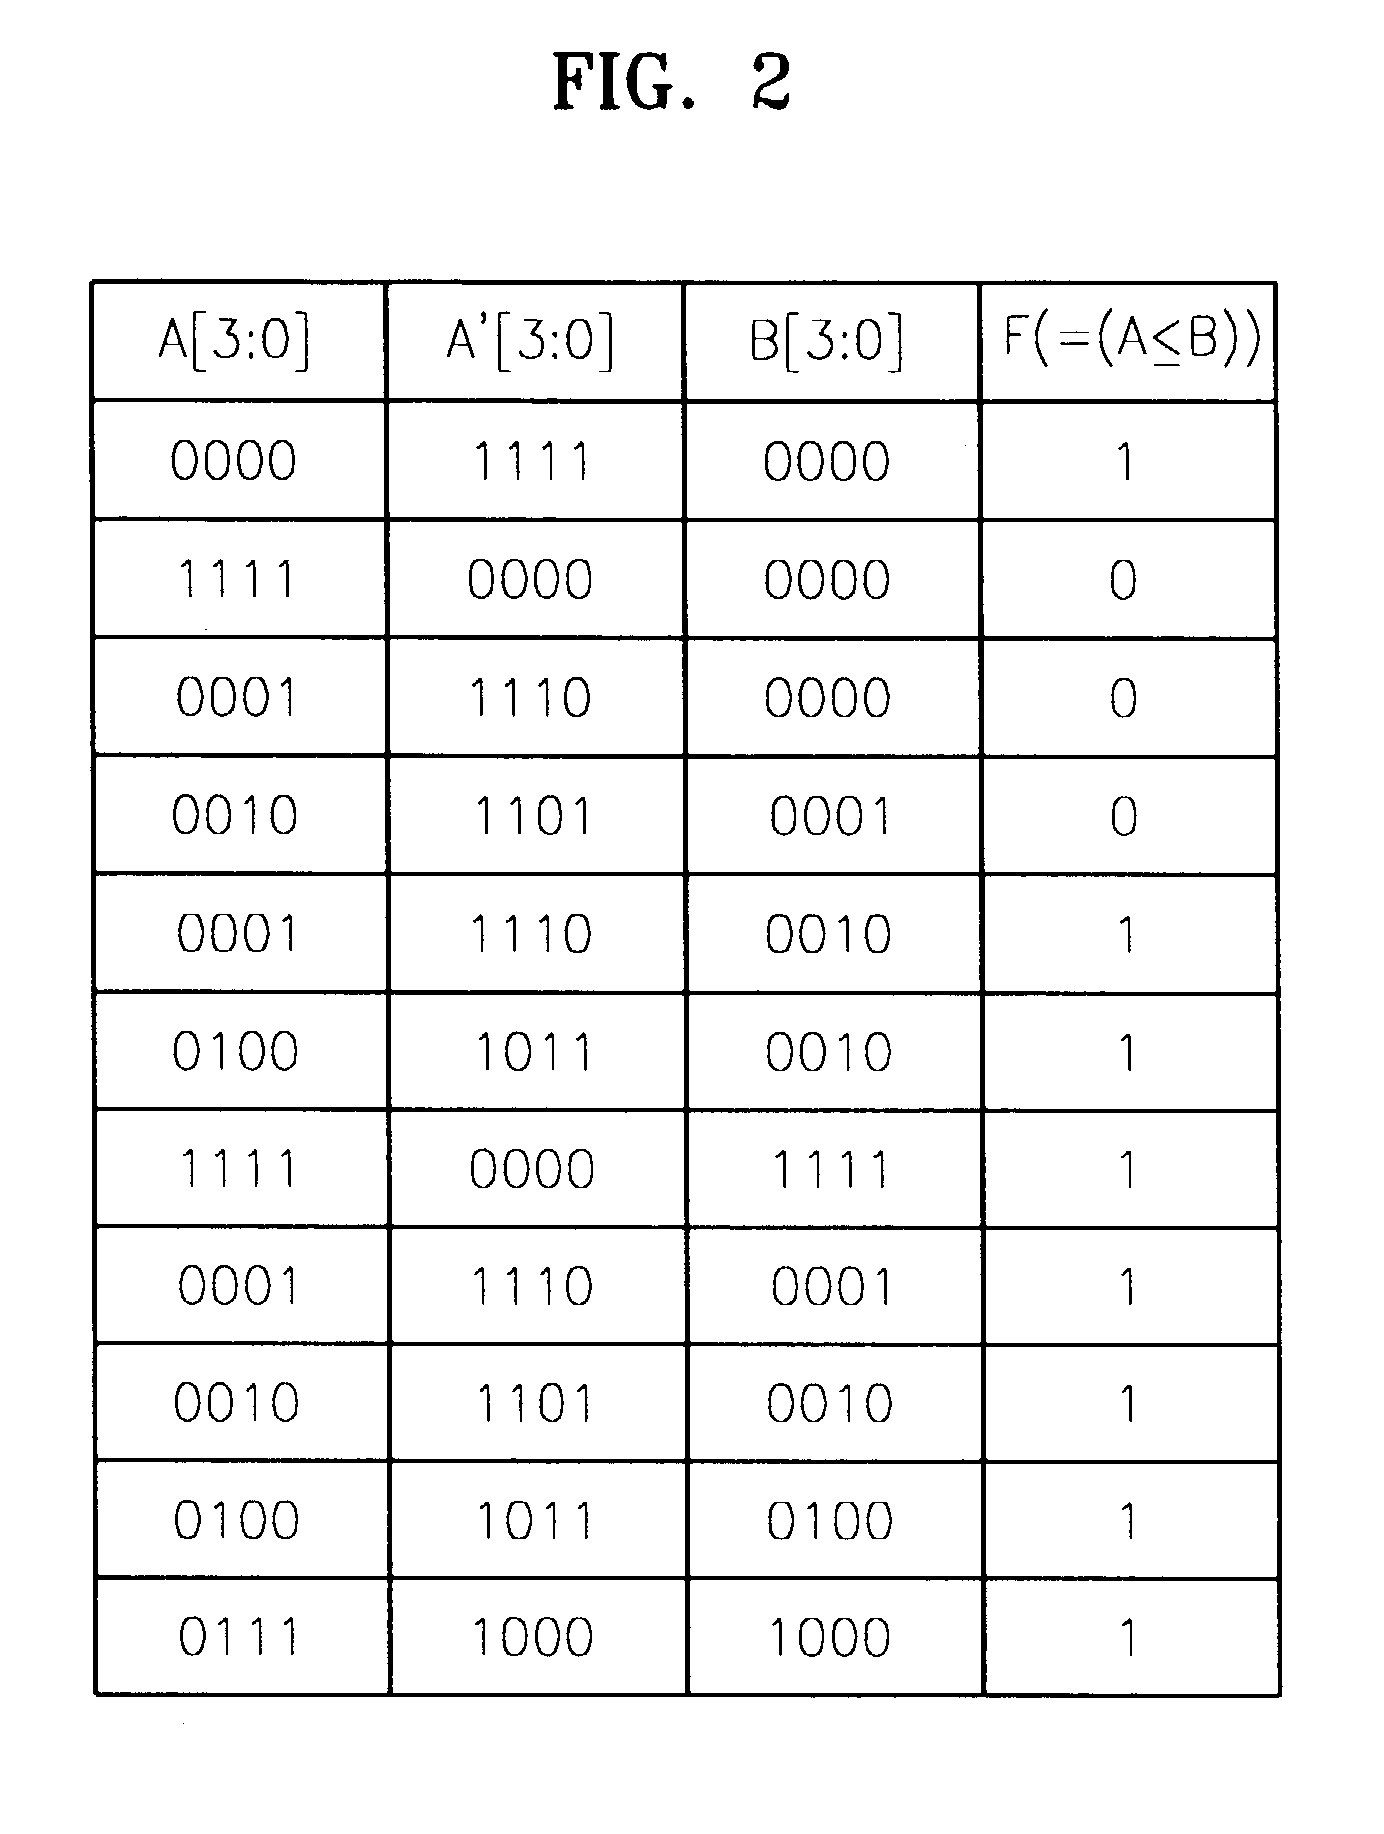 Comparator circuit and method